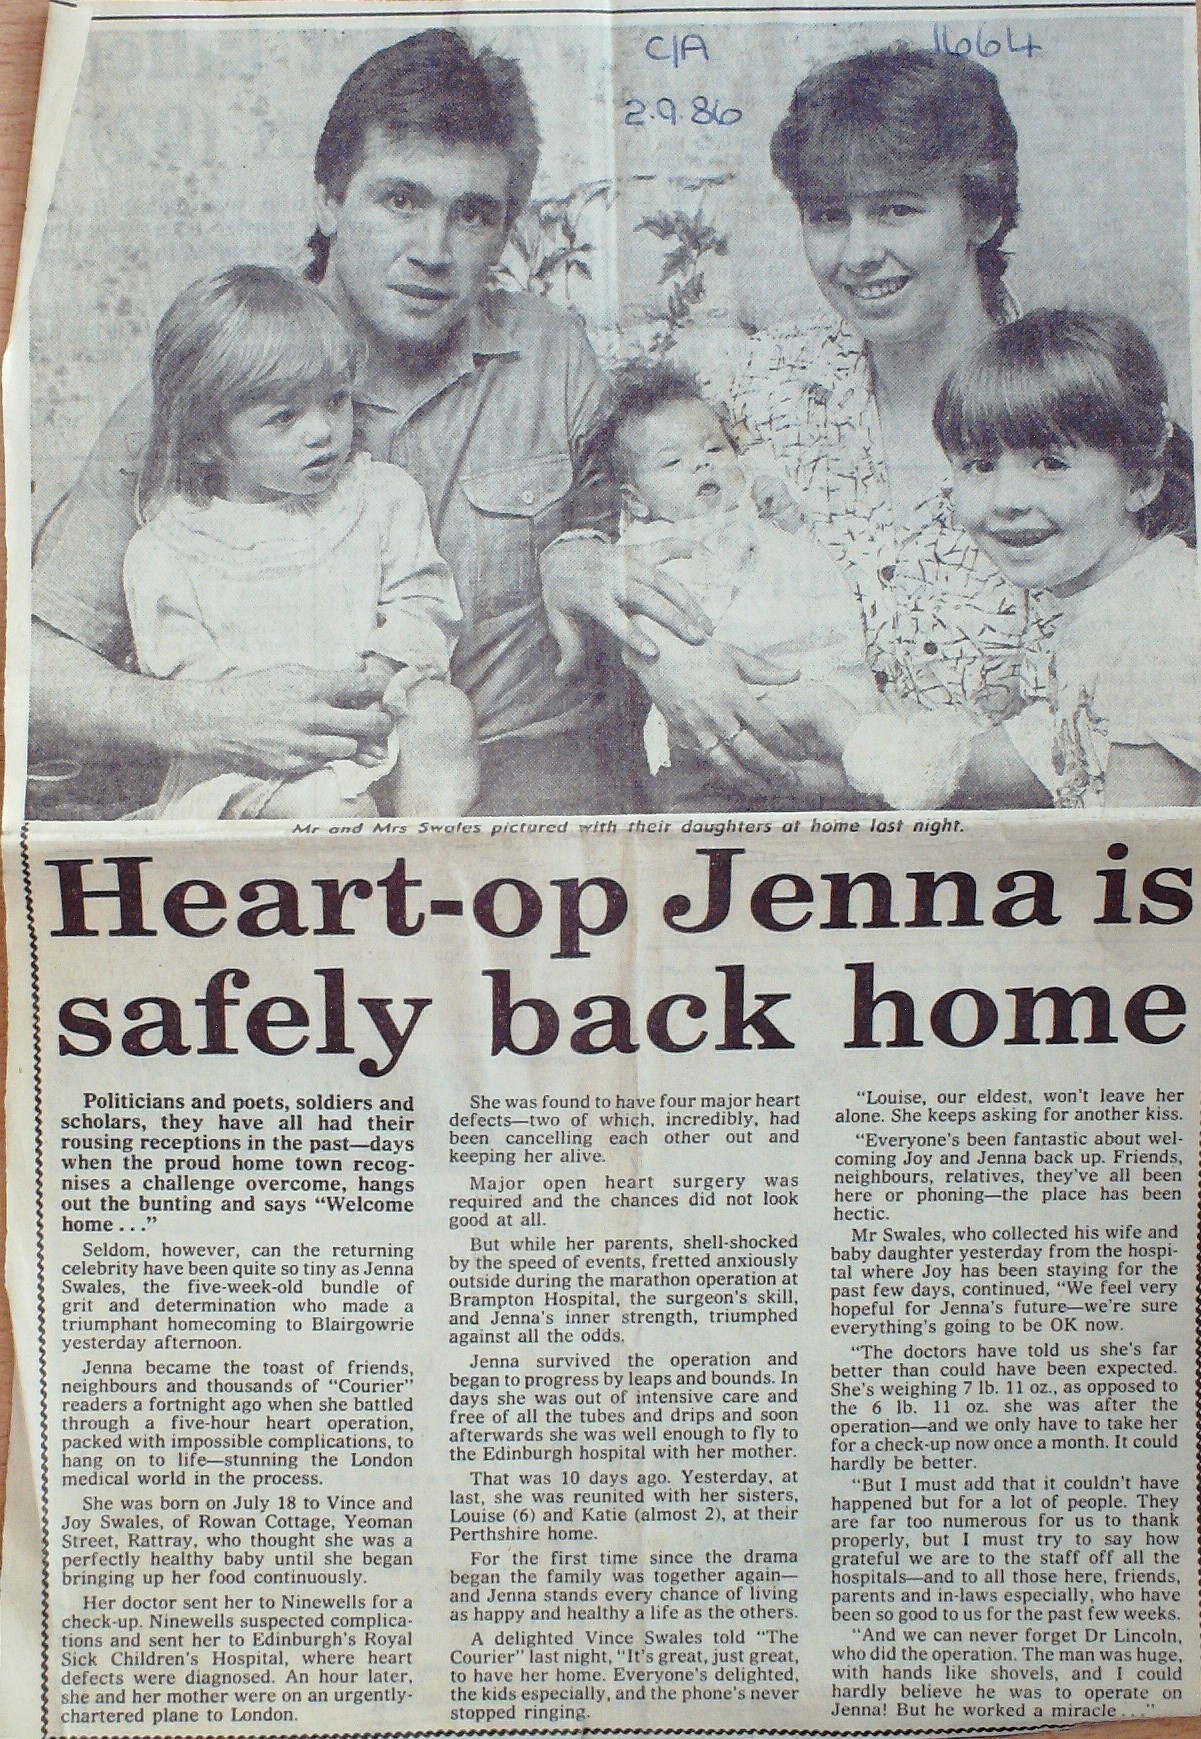 How the Courier reported Jenna's recovery in 1986.